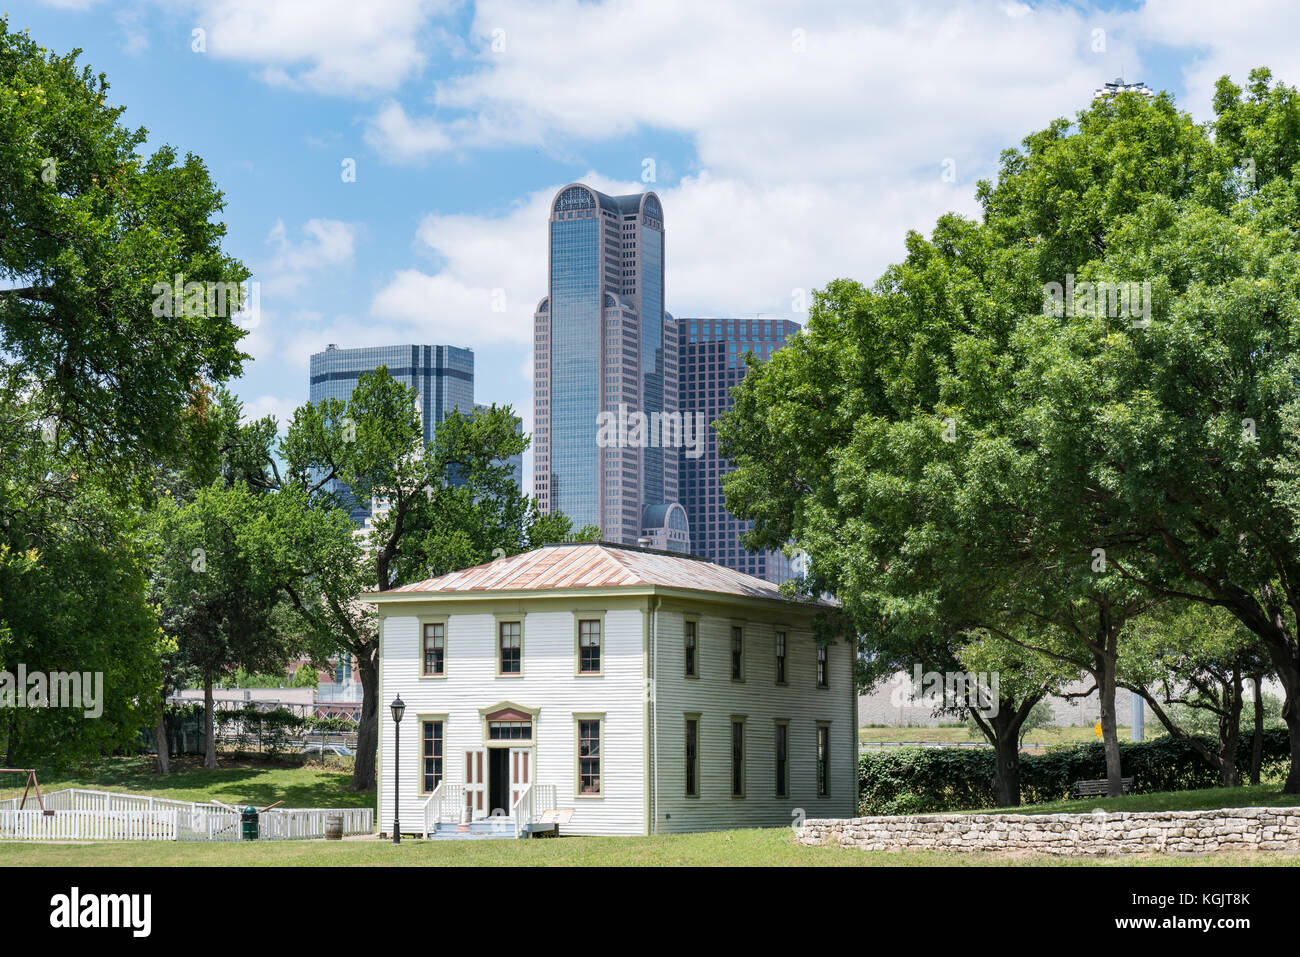 DALLAS, TX - MAY13, 2017: Historic Renner School building in the Dallas Heritage Village with the Dallas city skyline in background. Stock Photo